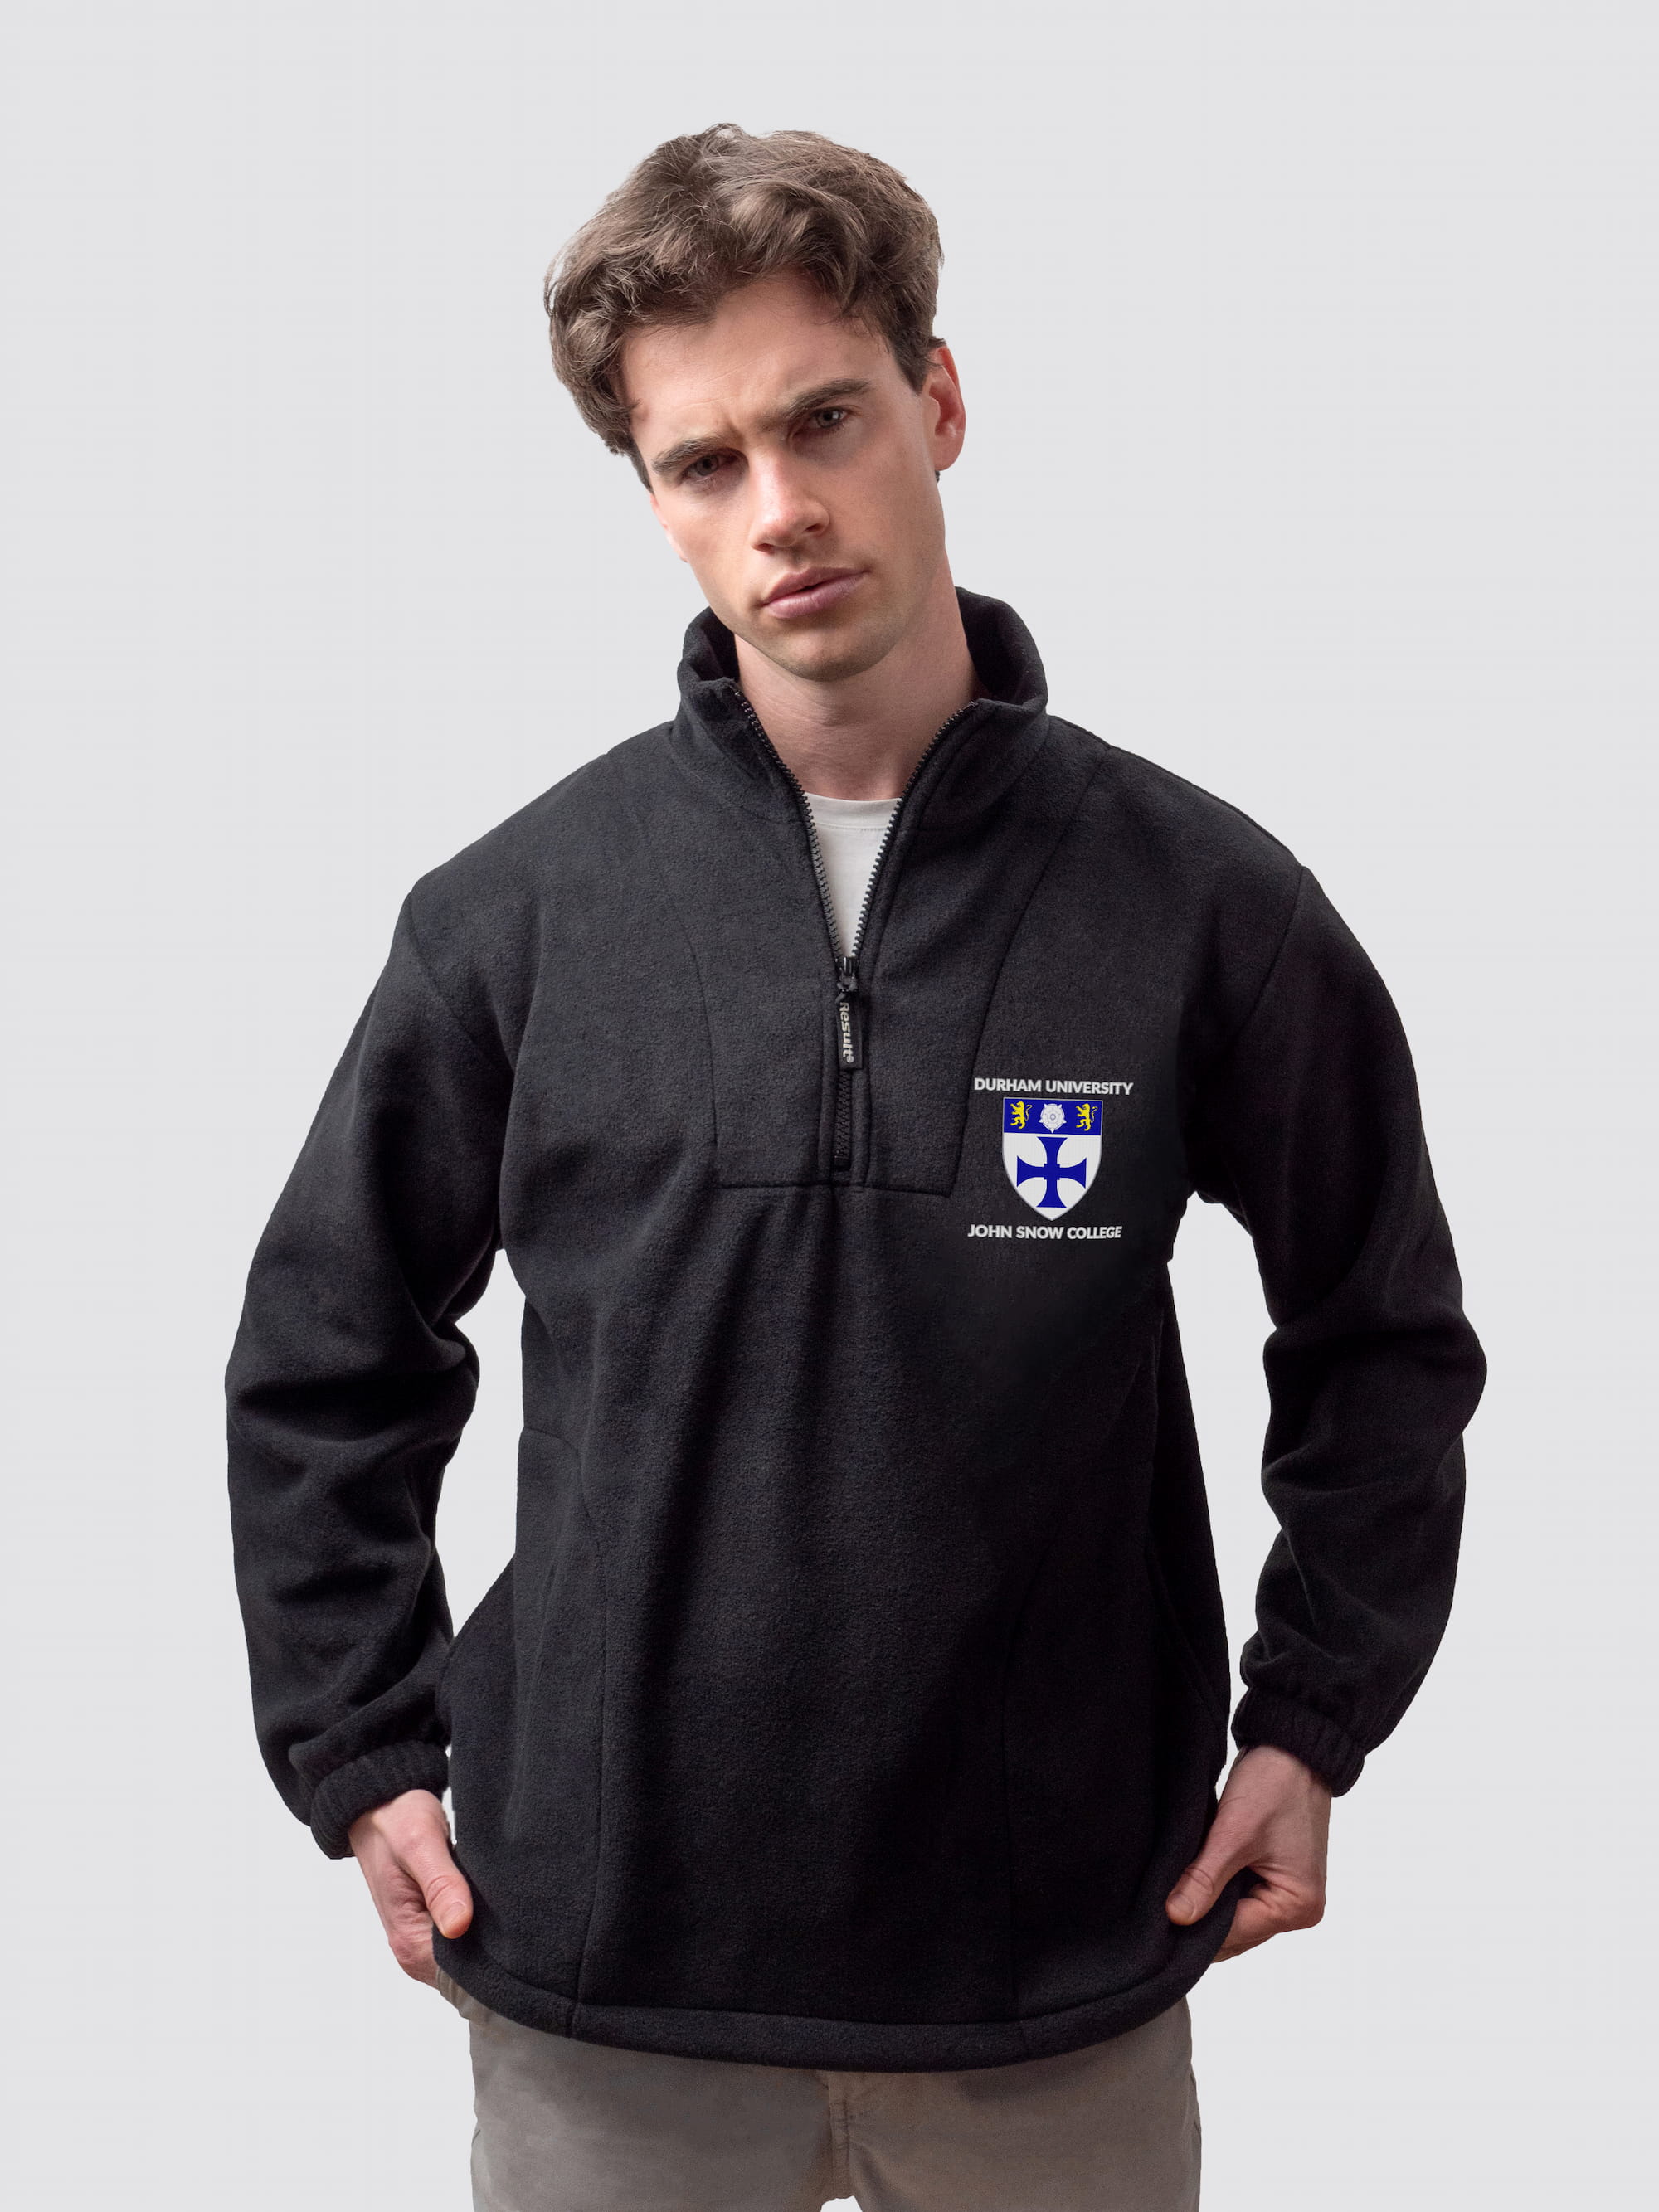 Durham university fleece, with custom embroidered initials and John Snow crest